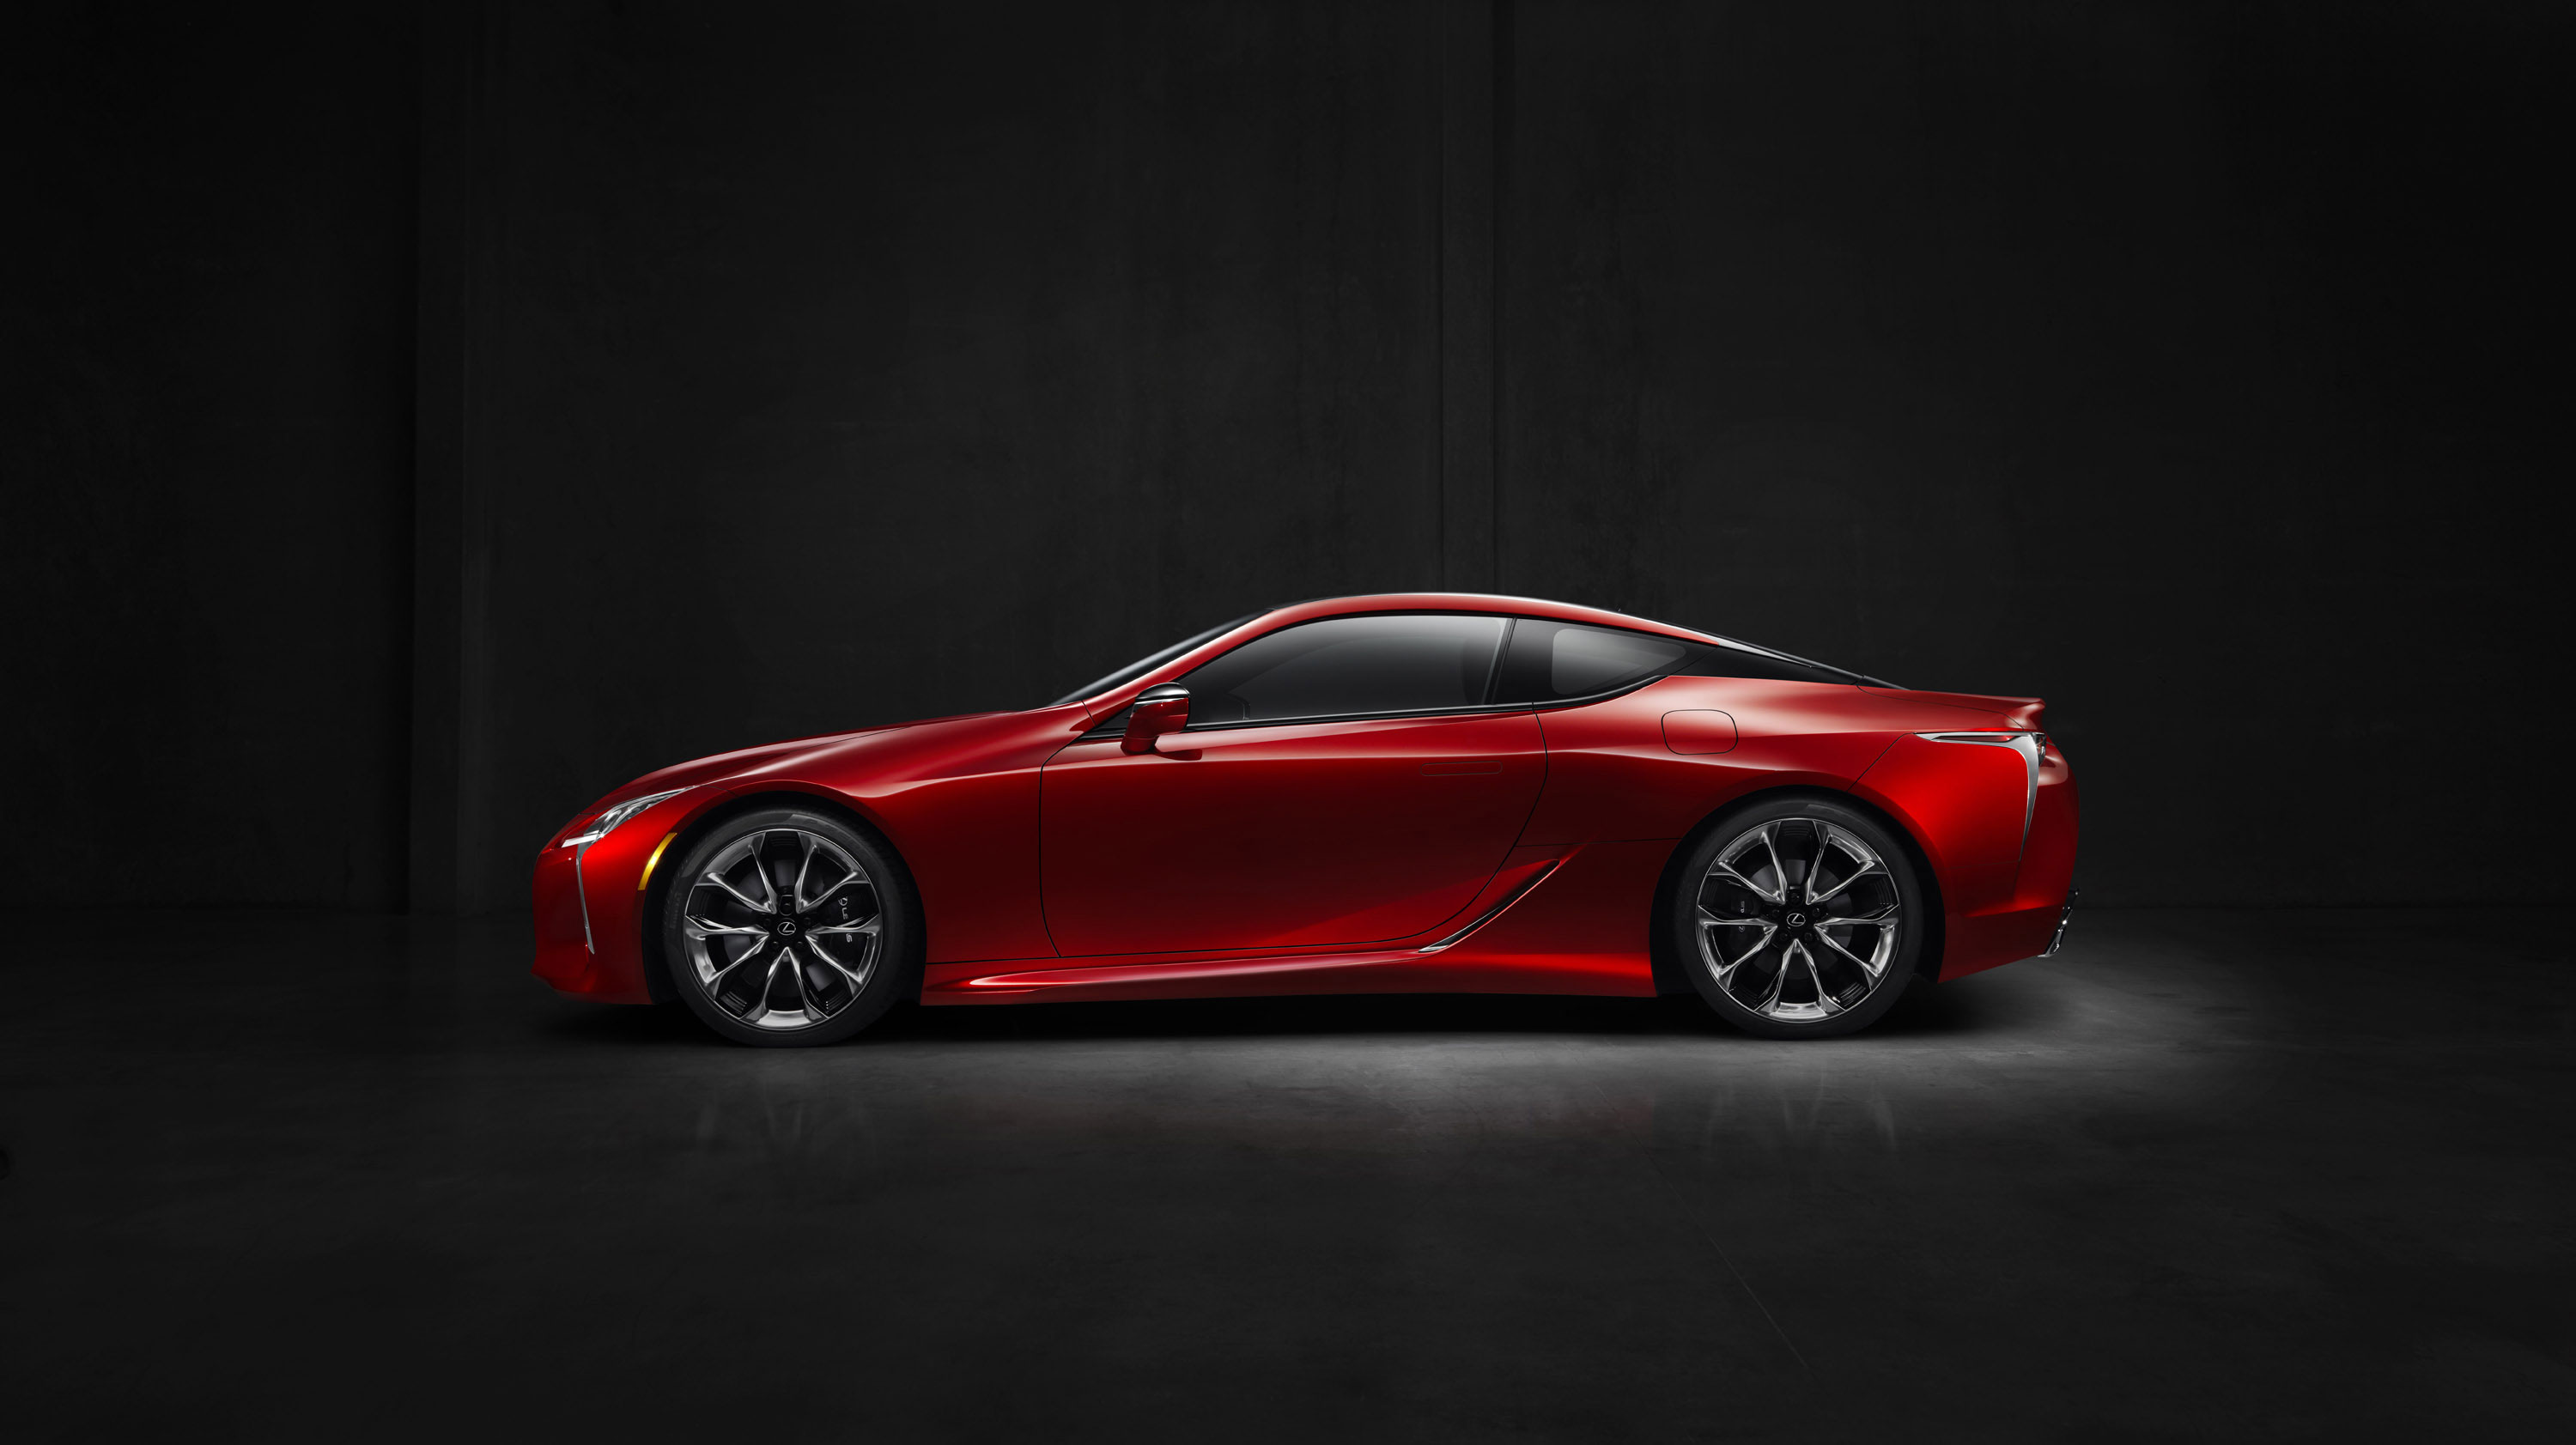 16-01-12-gallery-lexus-lc-500-official-2